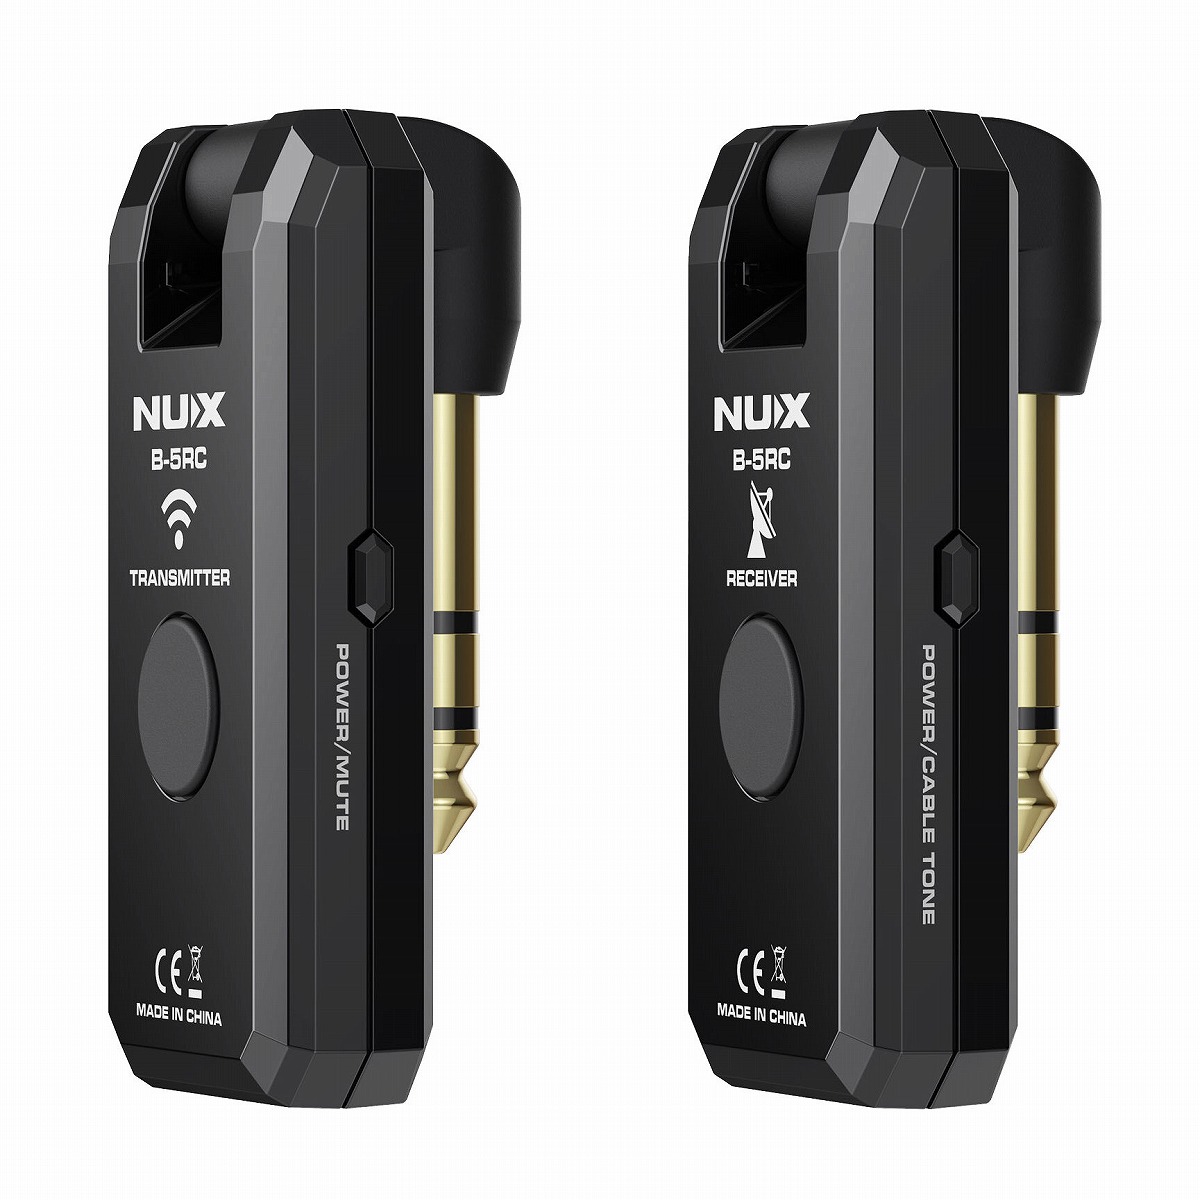 NUX B-5RC 2.4GHz Guitar Wireless System ワイヤレスシステム イシバシ楽器